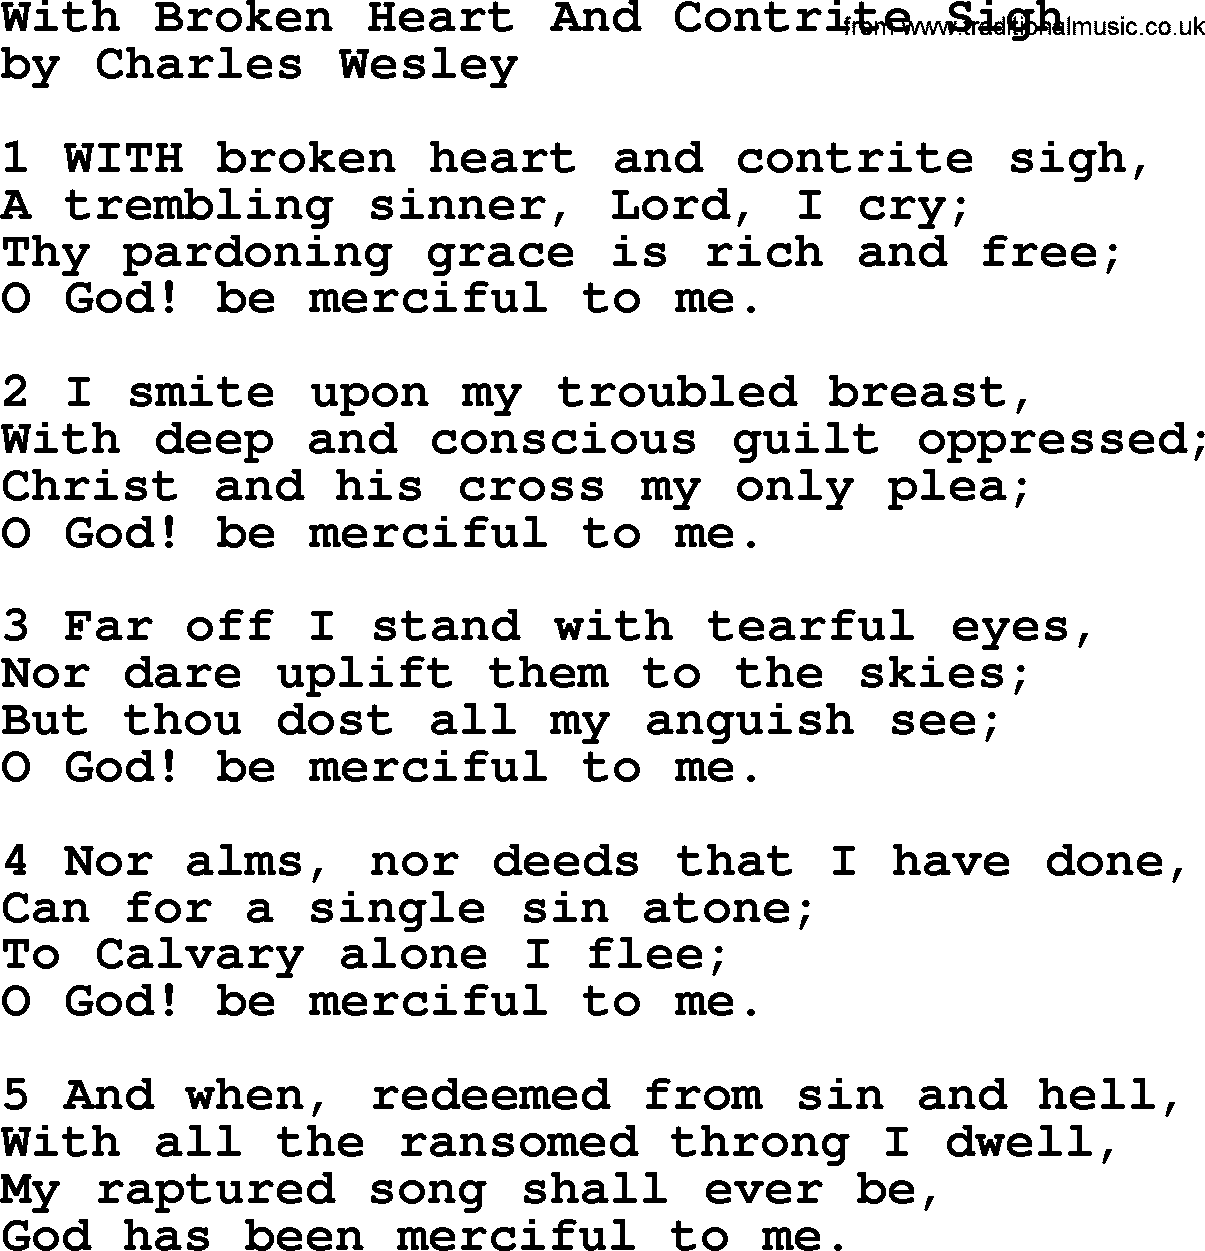 Charles Wesley hymn: With Broken Heart And Contrite Sigh, lyrics